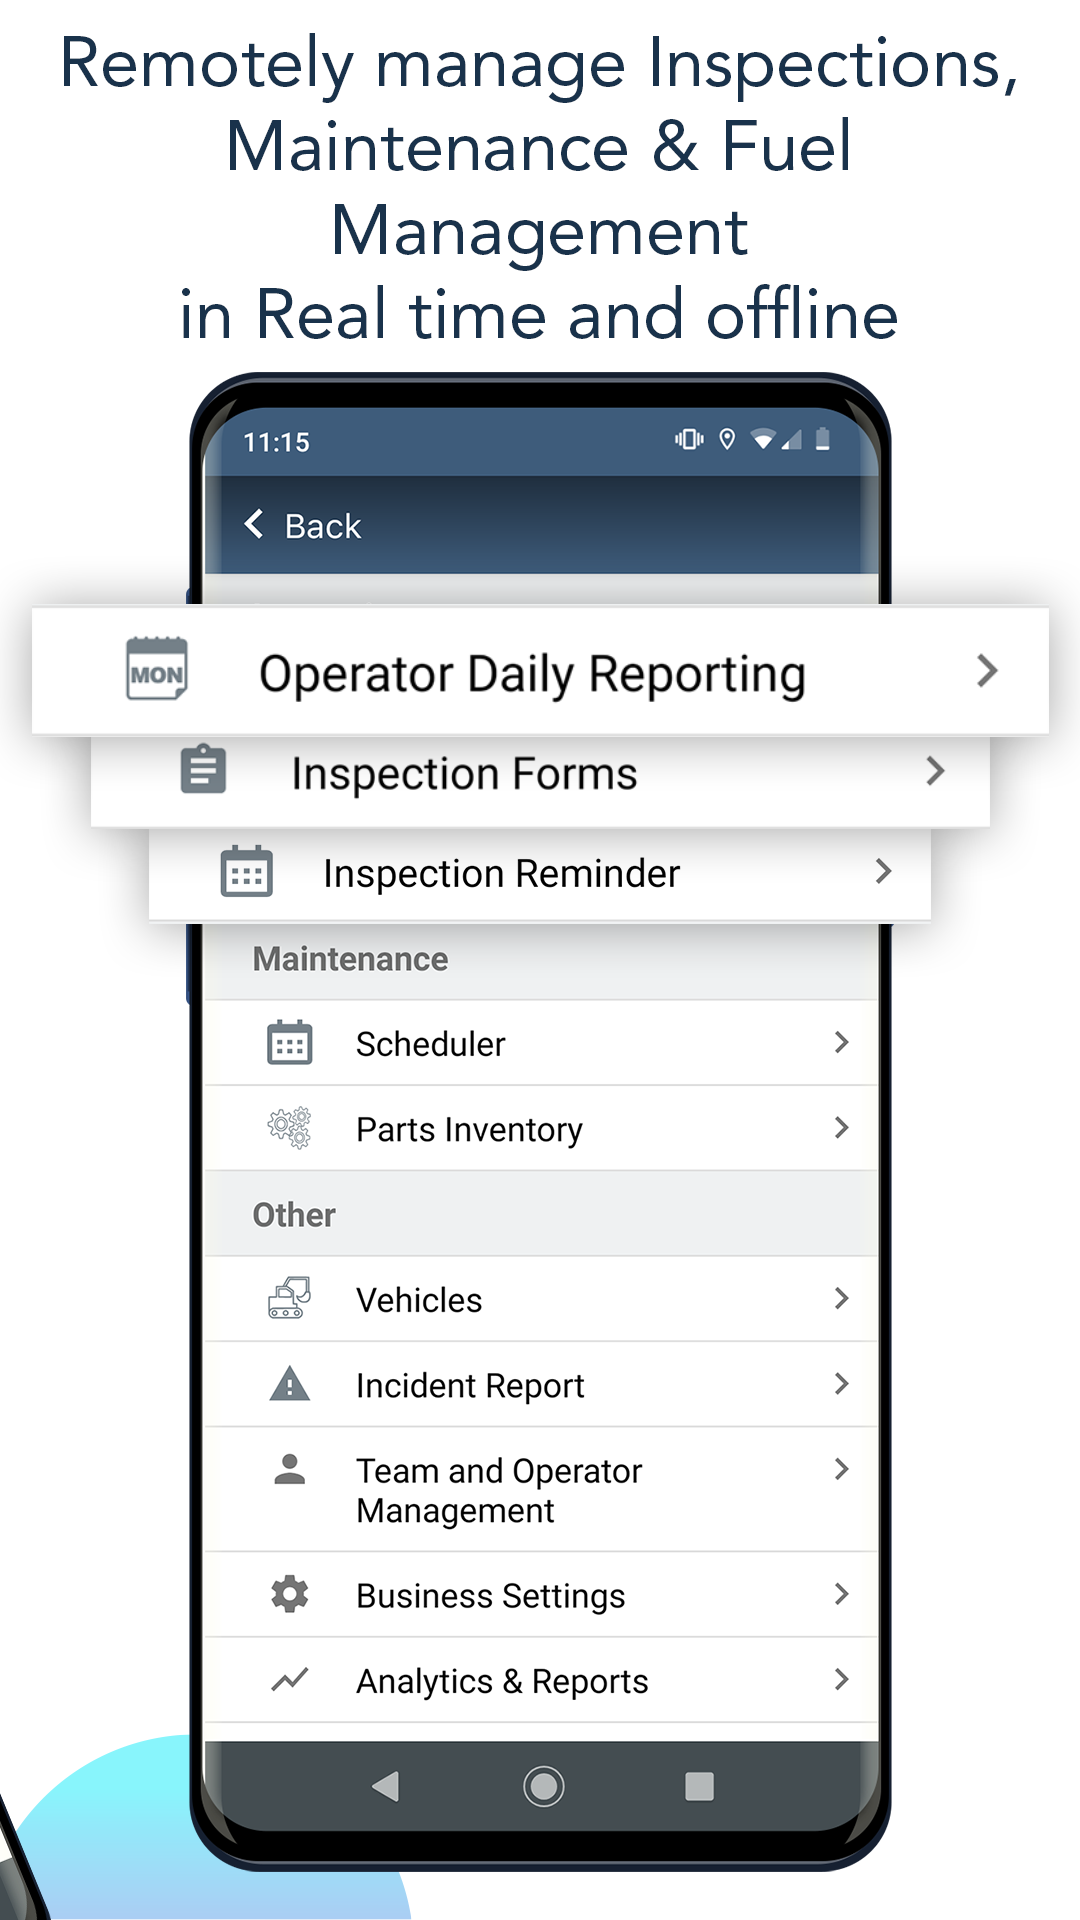 Remotely manage inspections, maintenance & Fuel Management